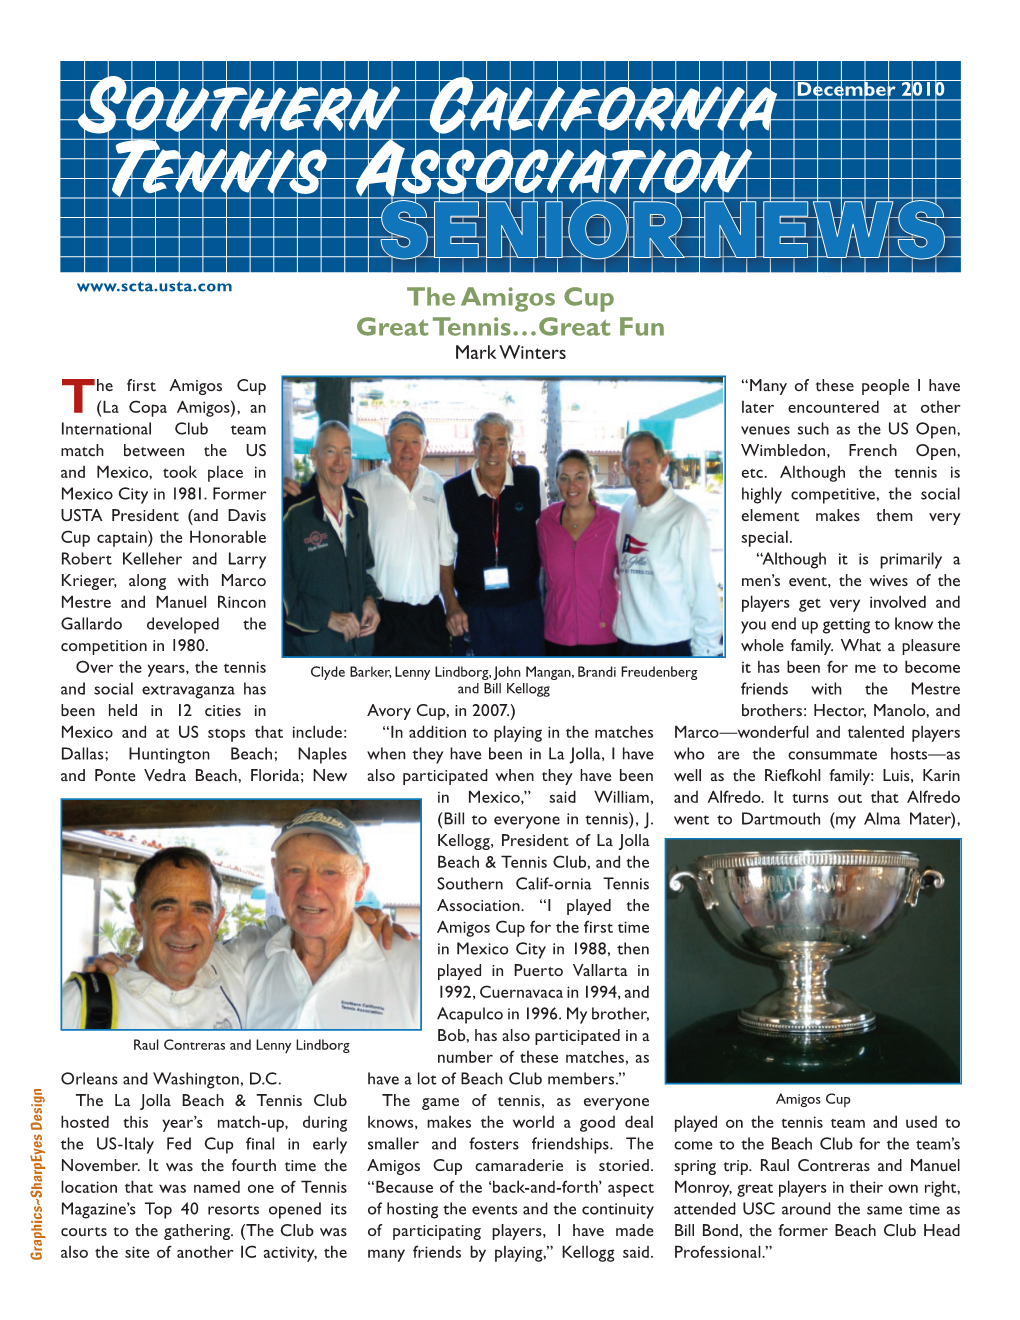 The Amigos Cup Great Tennis…